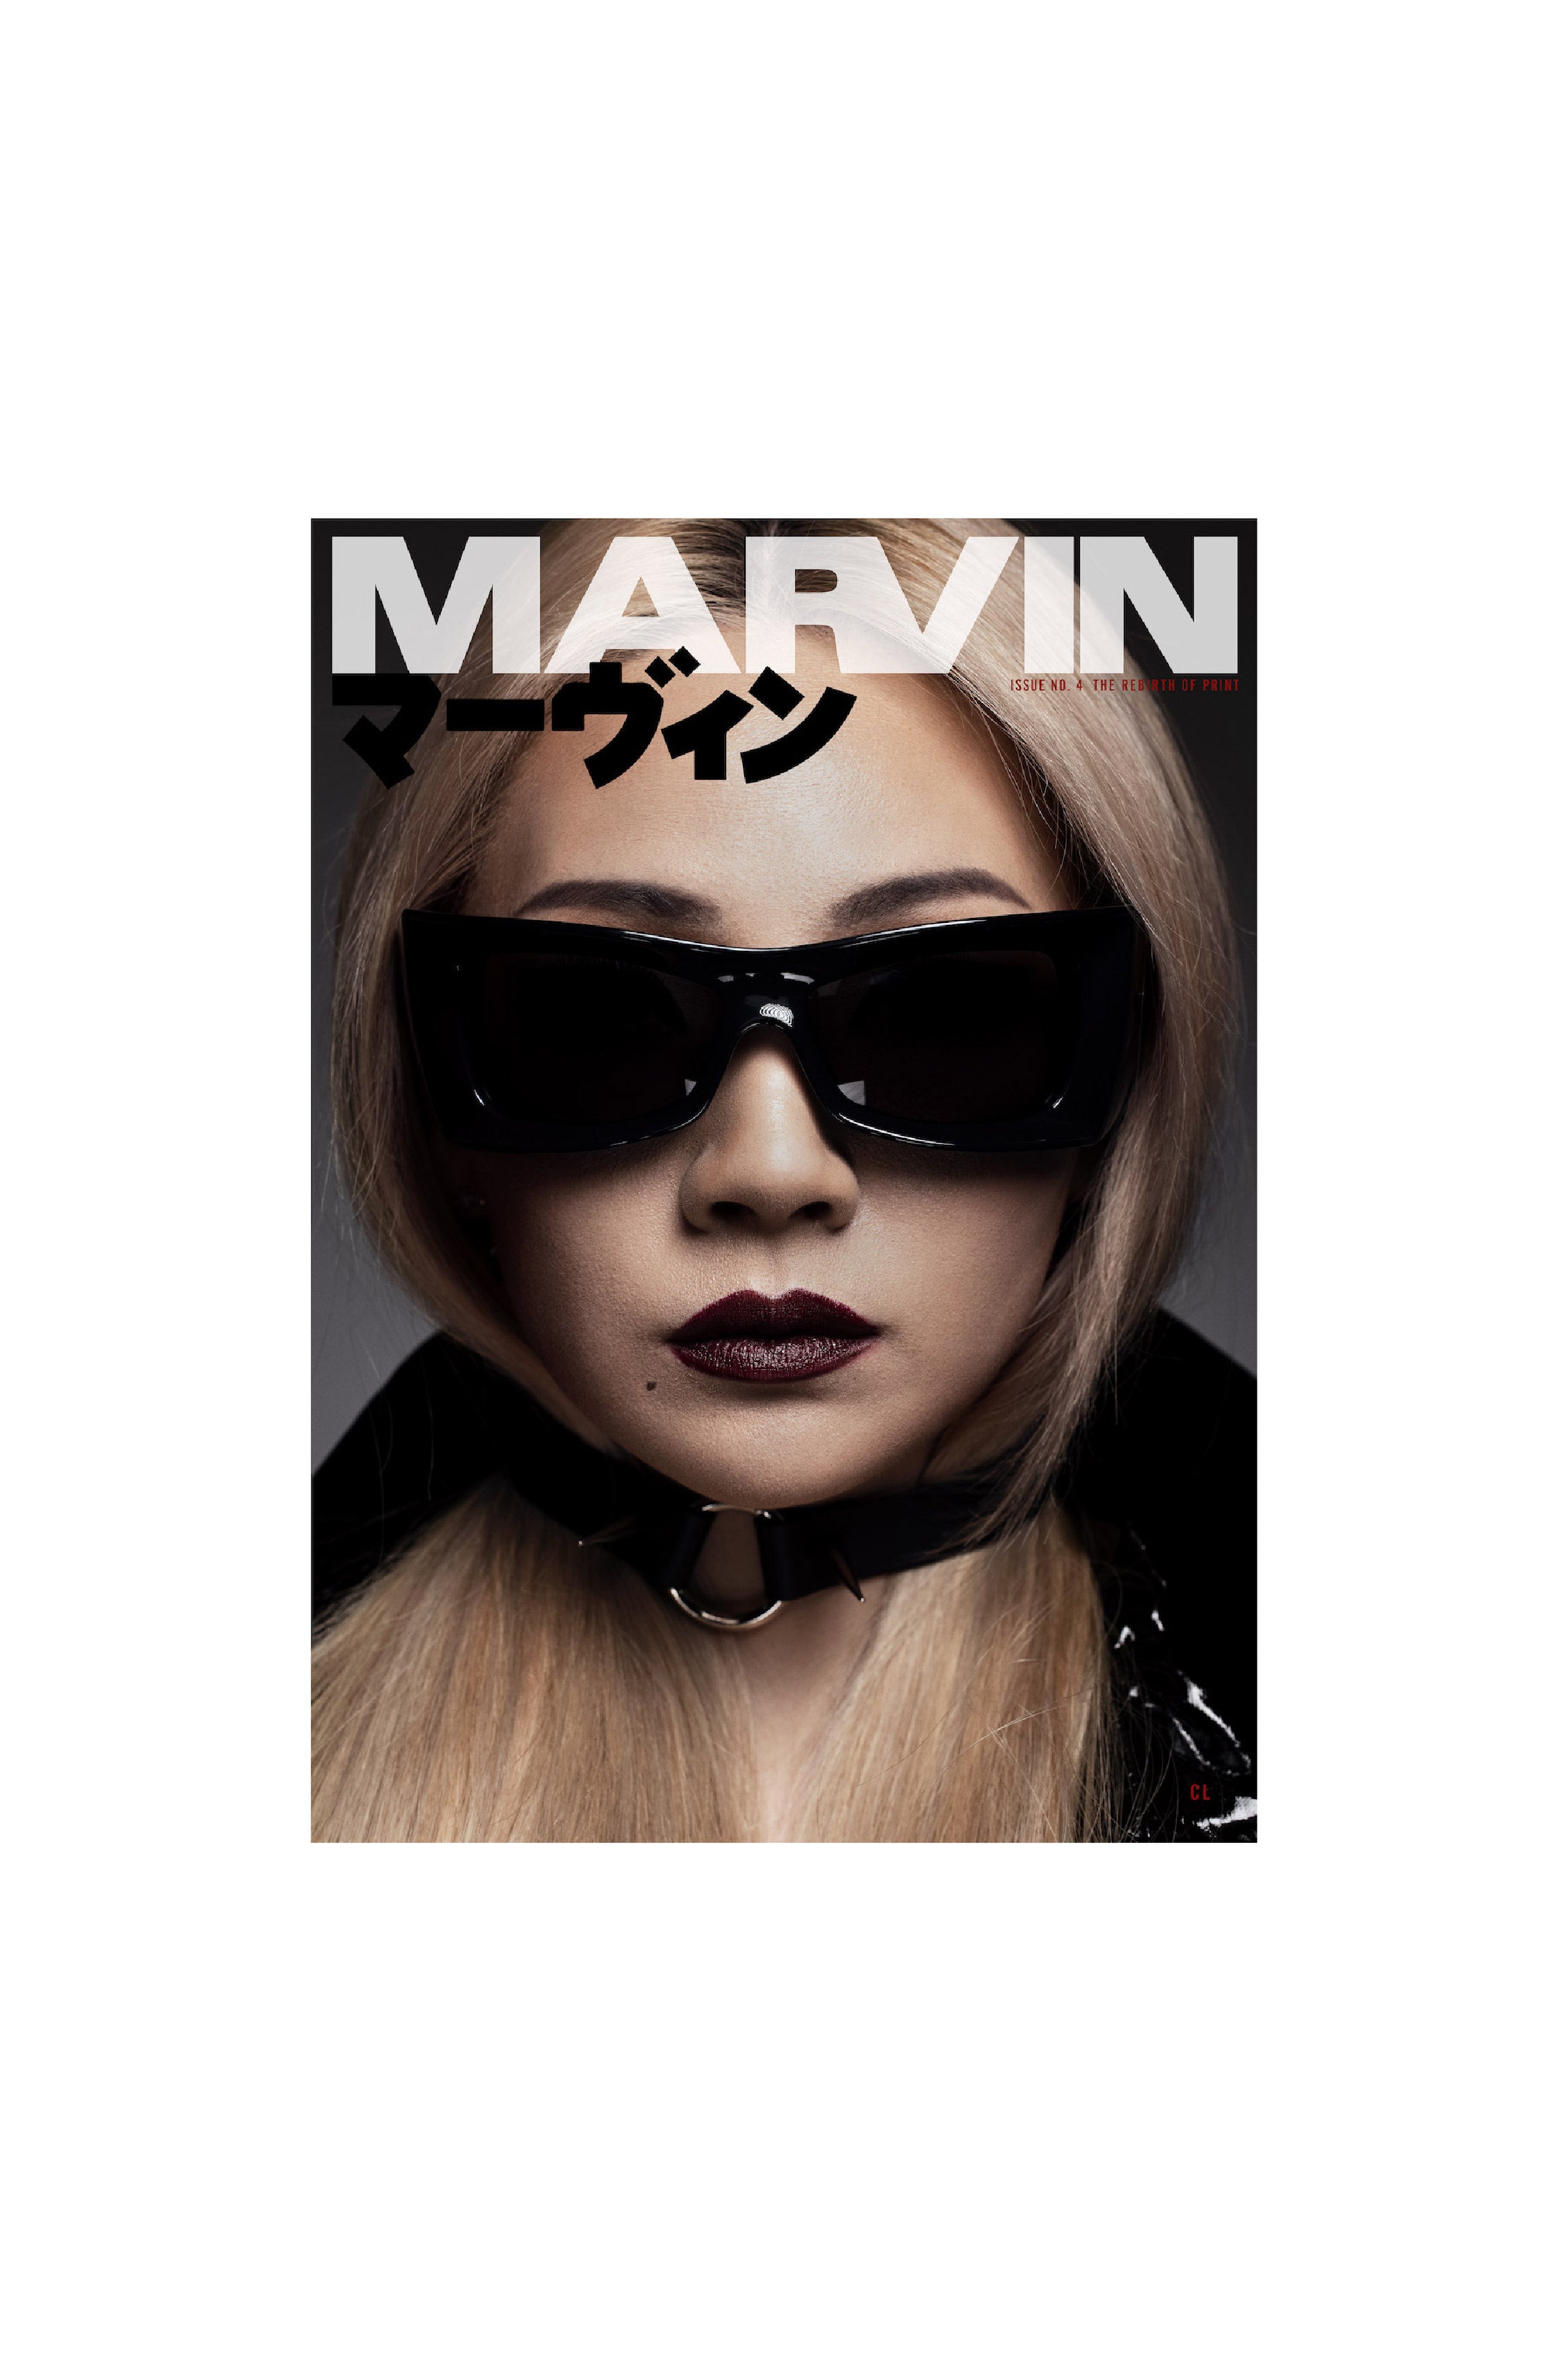 Marvin, A PUNK ROCK MESSIANIC VISION FOR THE FUTURE